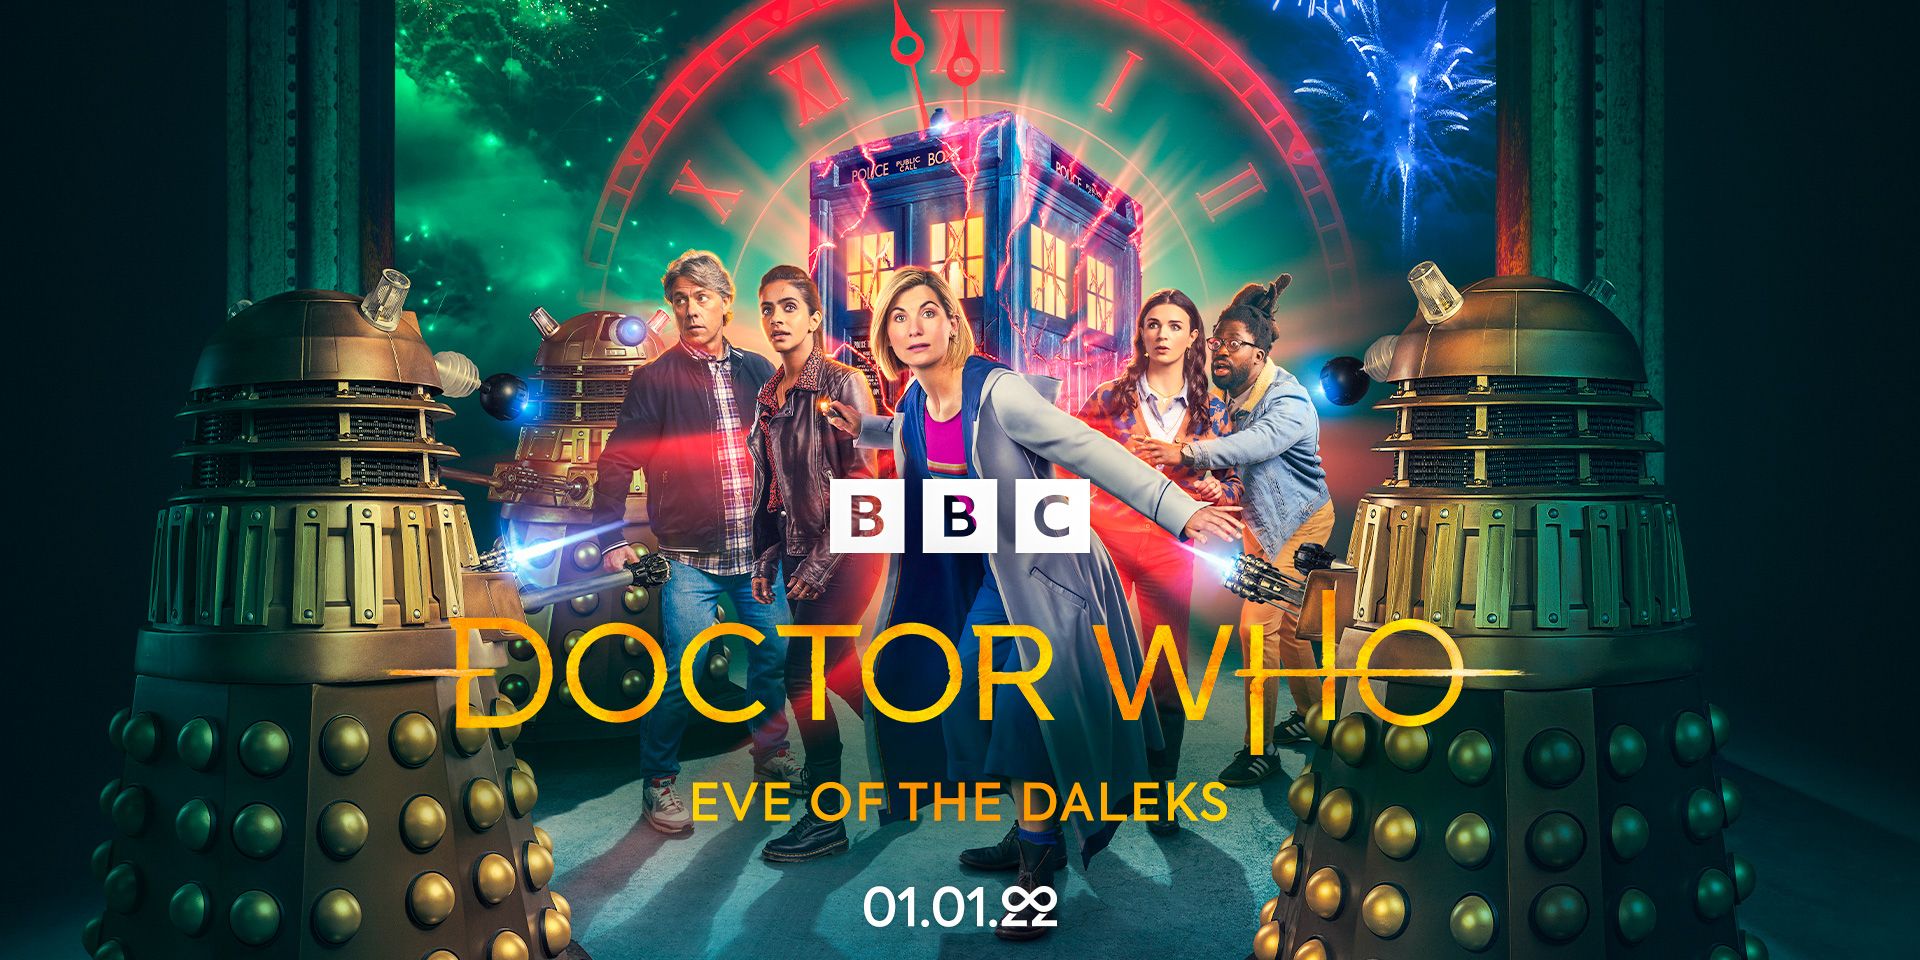 Doctor Who Season 13 New Year's Special Trailer: Daleks in a Time Loop